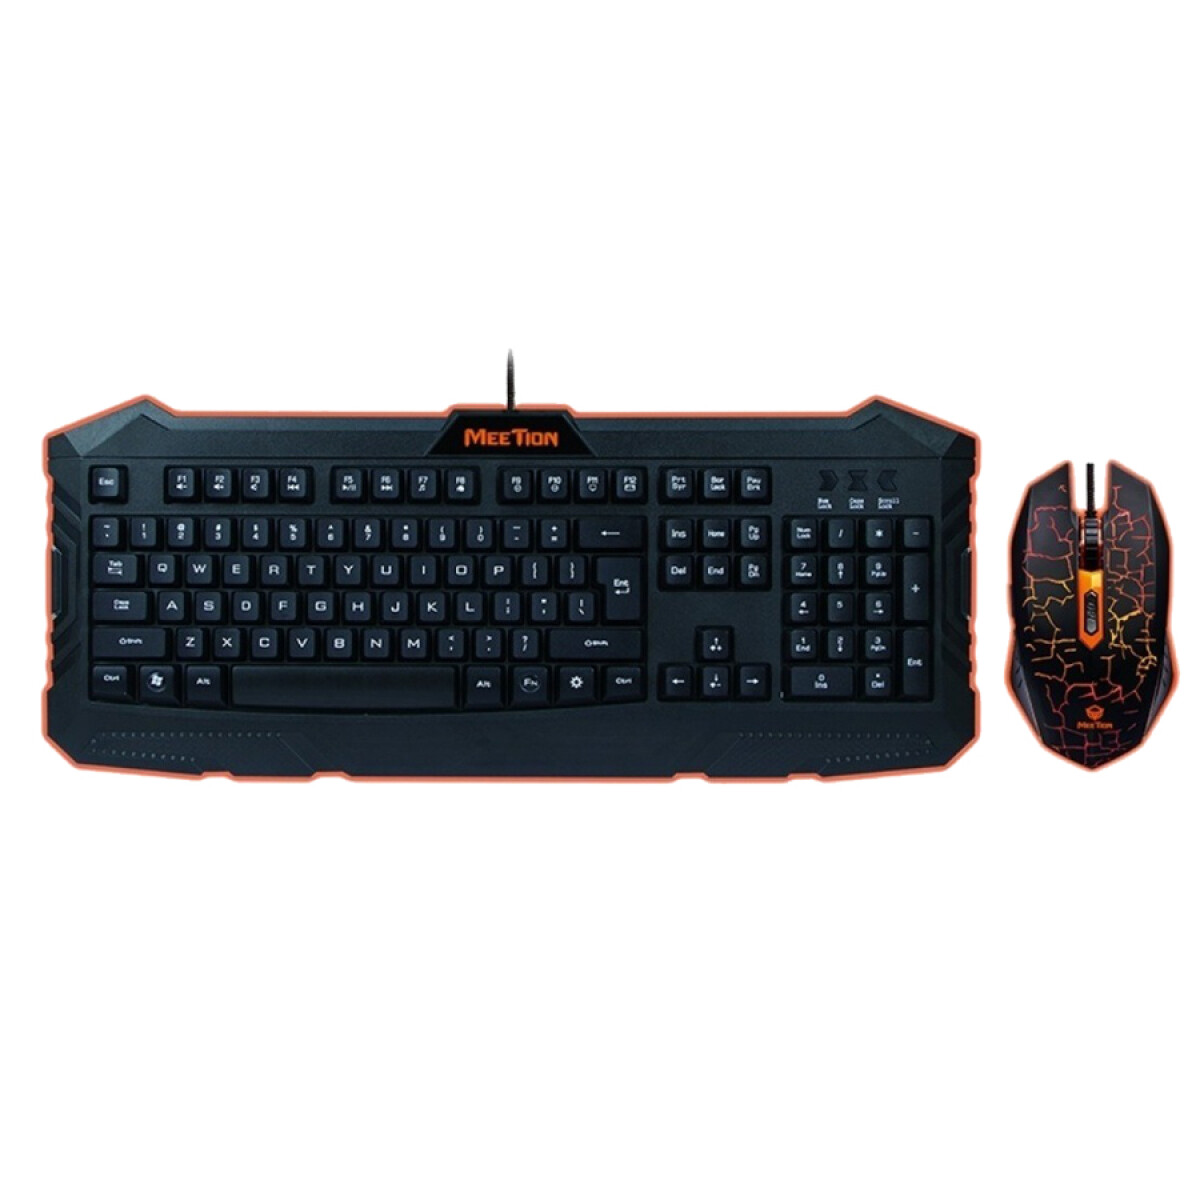 Combo Teclado y Mouse Gaming Meetion 5100 Backlit 